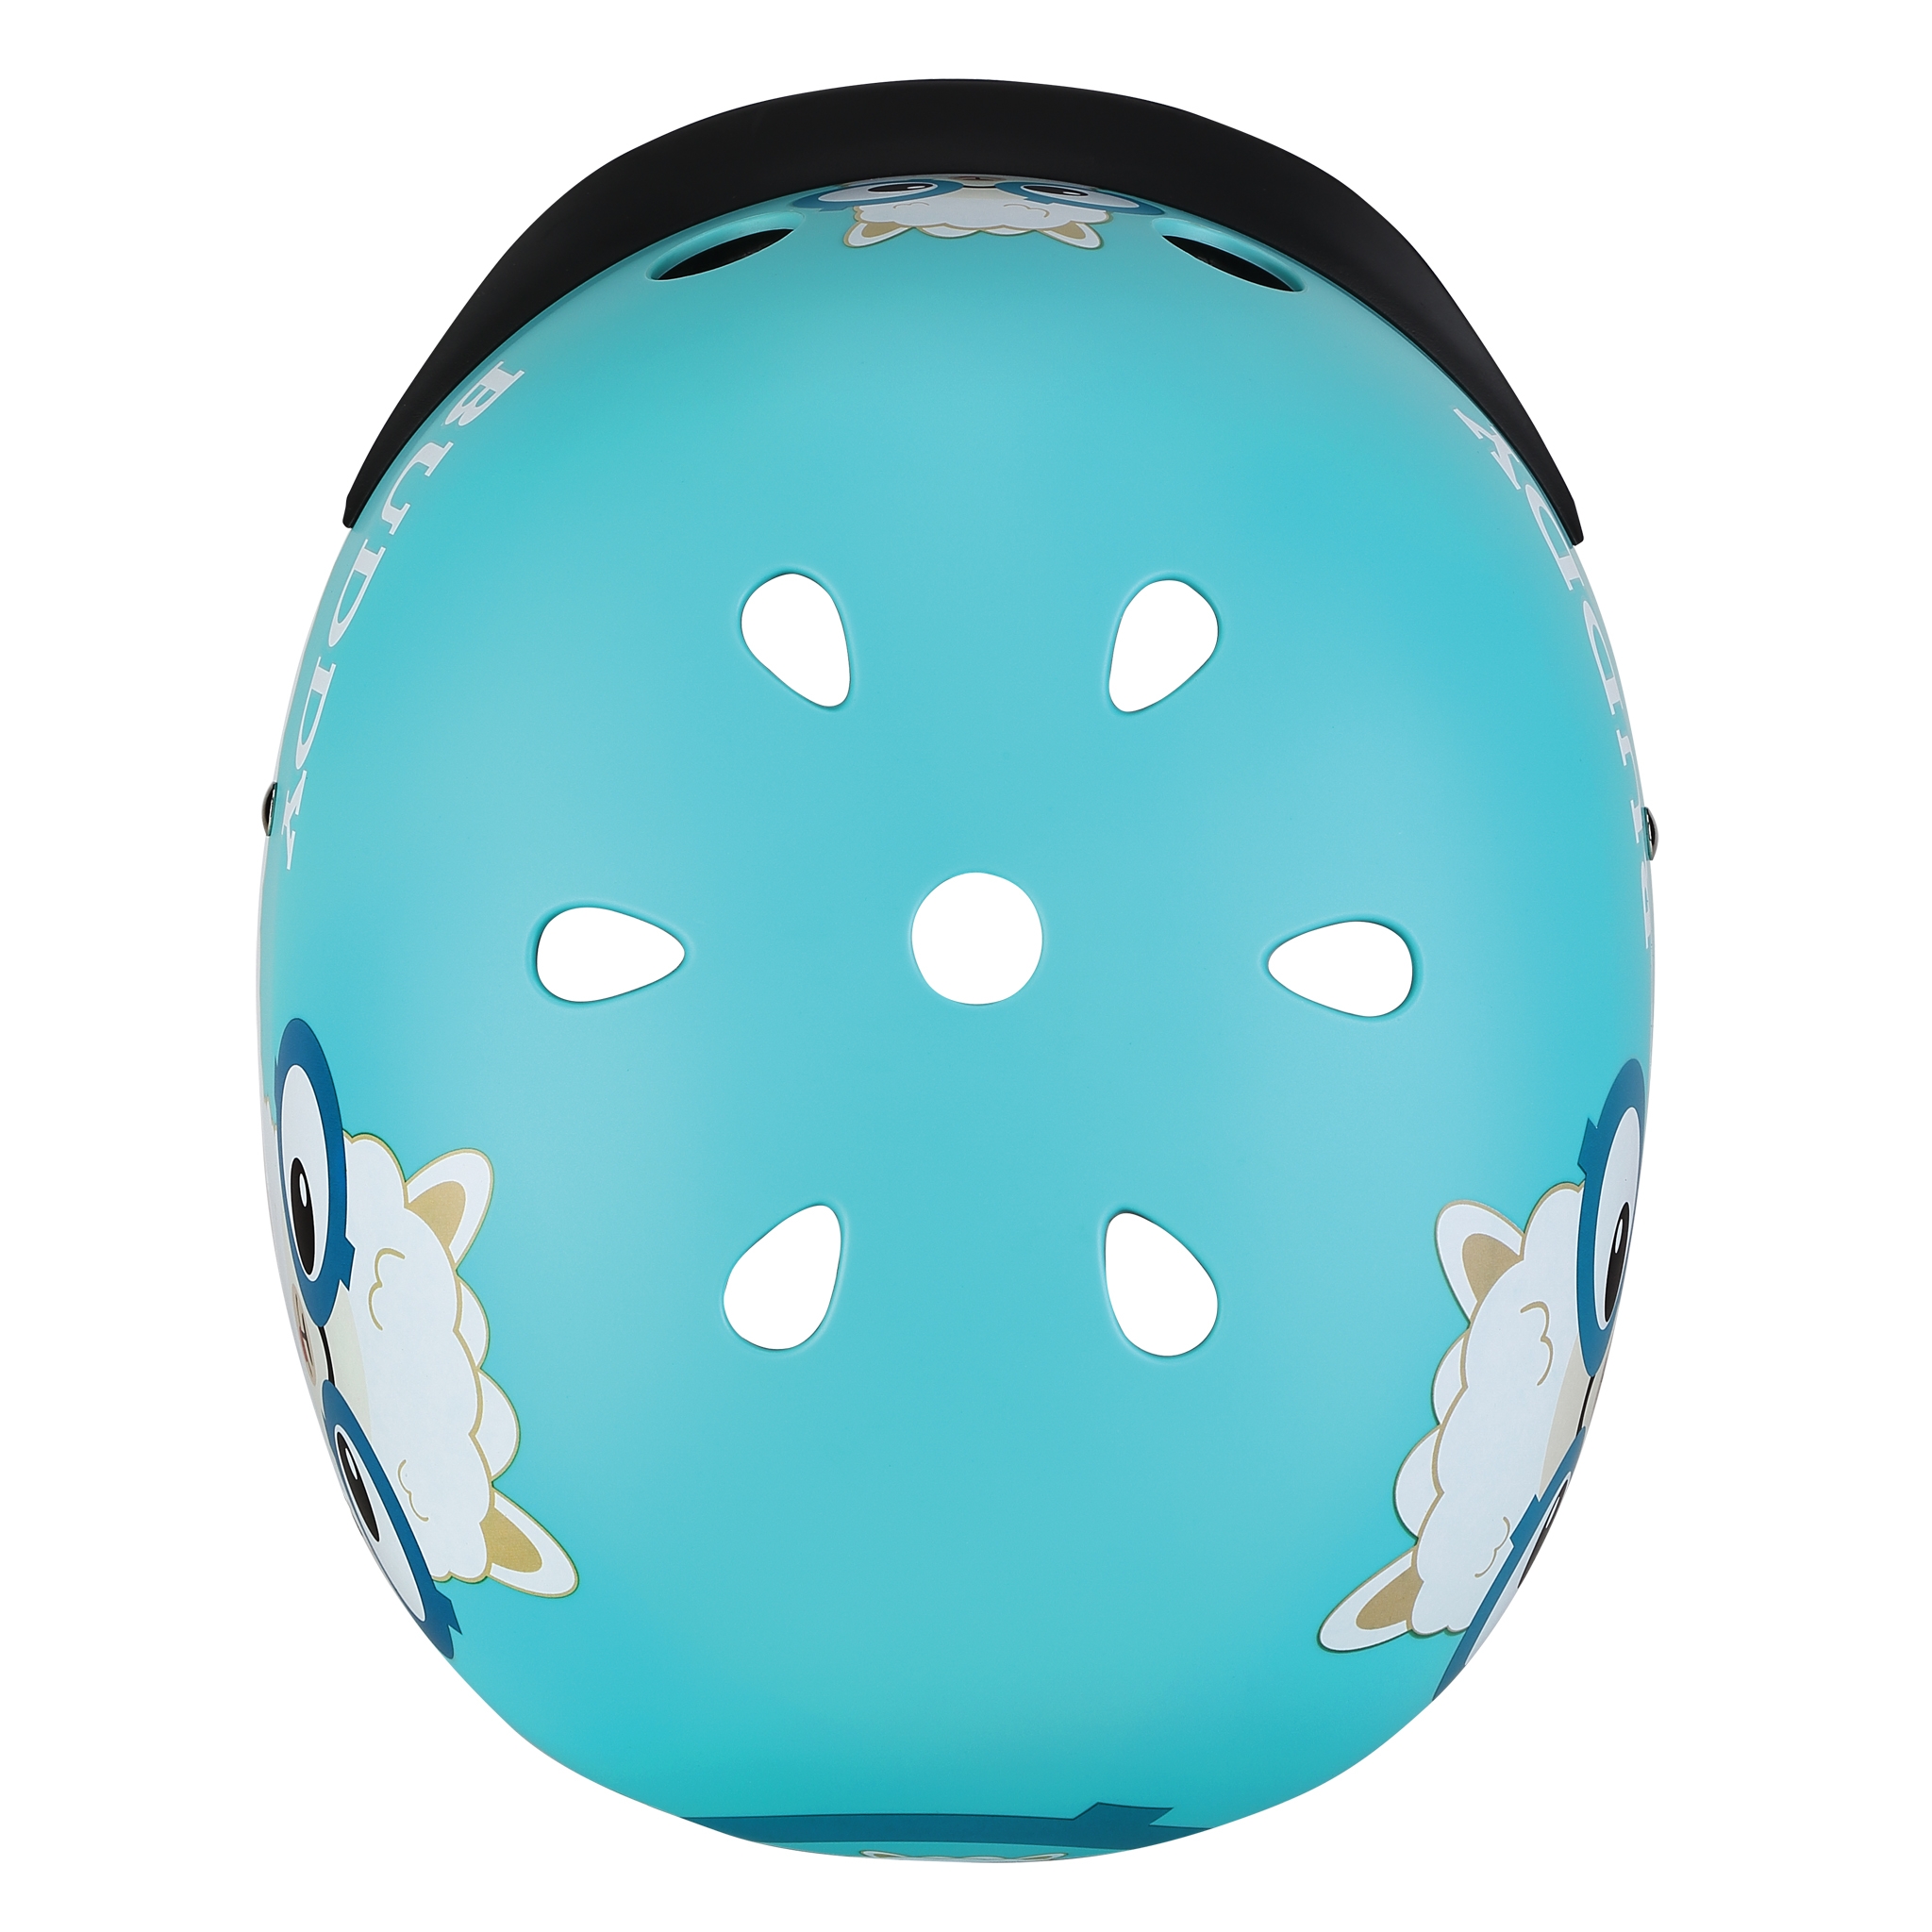 ELITE-helmets-best-scooter-helmets-for-kids-with-air-vents-cooling-system-blue 2